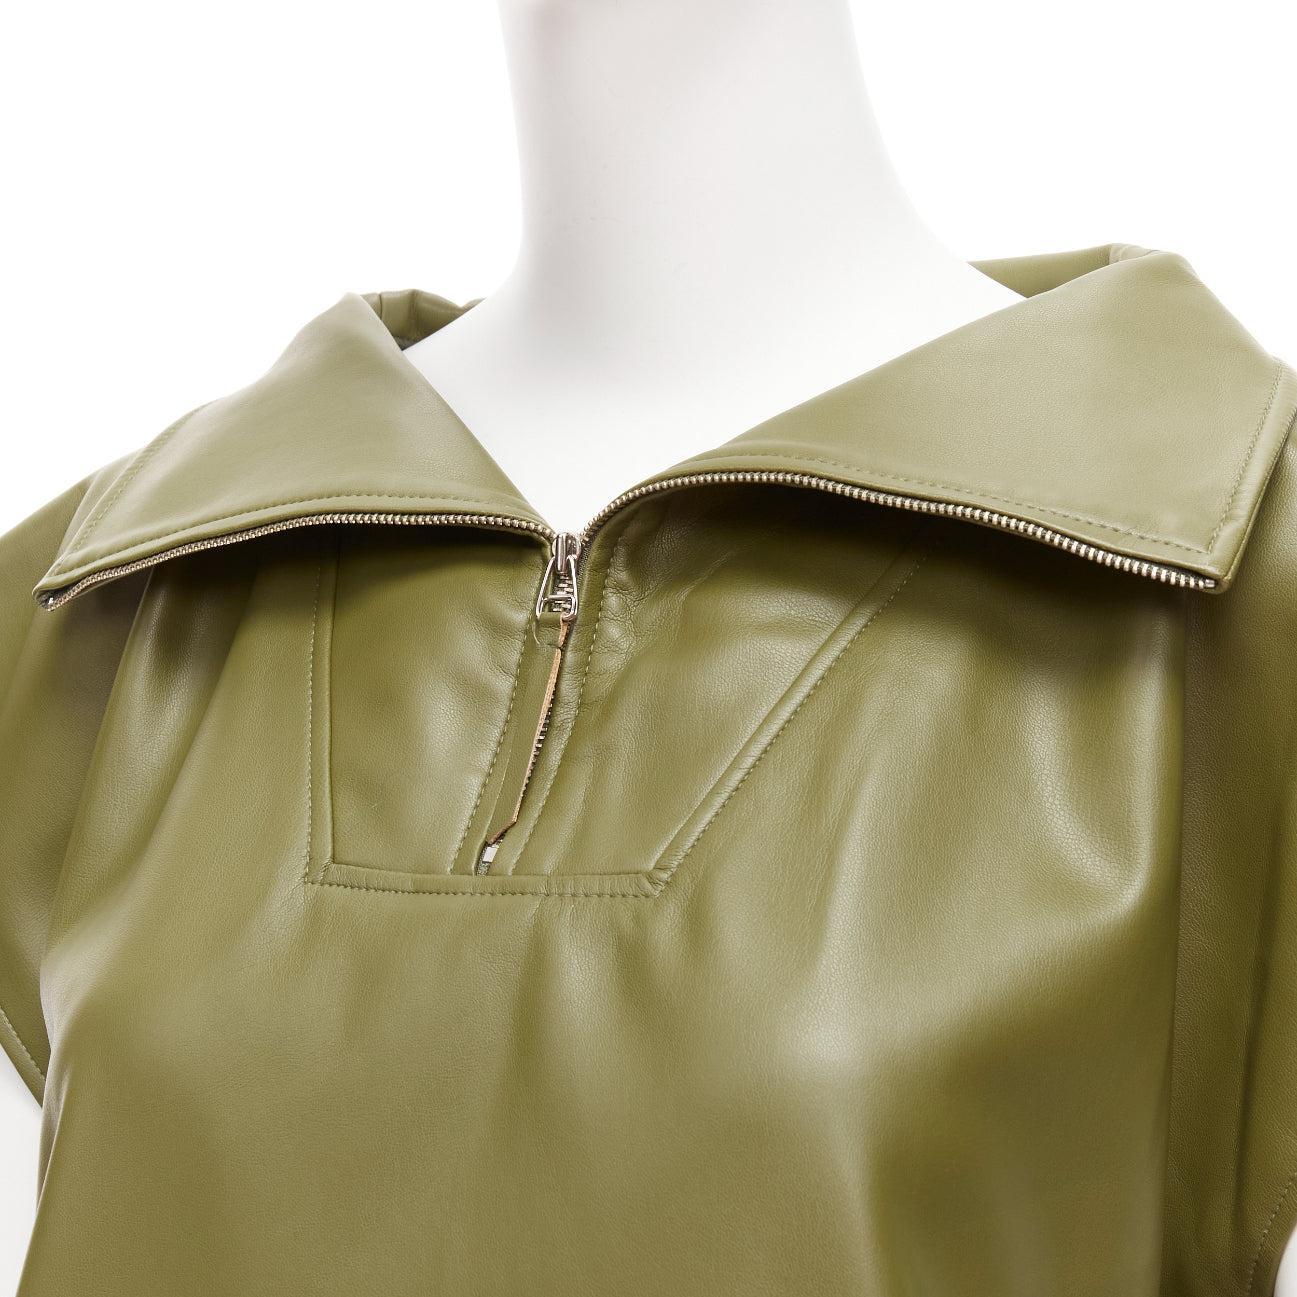 FRANKIE SHOP khaki green faux leather PU half zip boxy popover sleeveless top XS
Reference: AAWC/A00633
Brand: Frankie Shop
Material: Acetate
Color: Green
Pattern: Solid
Closure: Zip
Extra Details: Half zip at collar. Slit side pockets.
Made in: